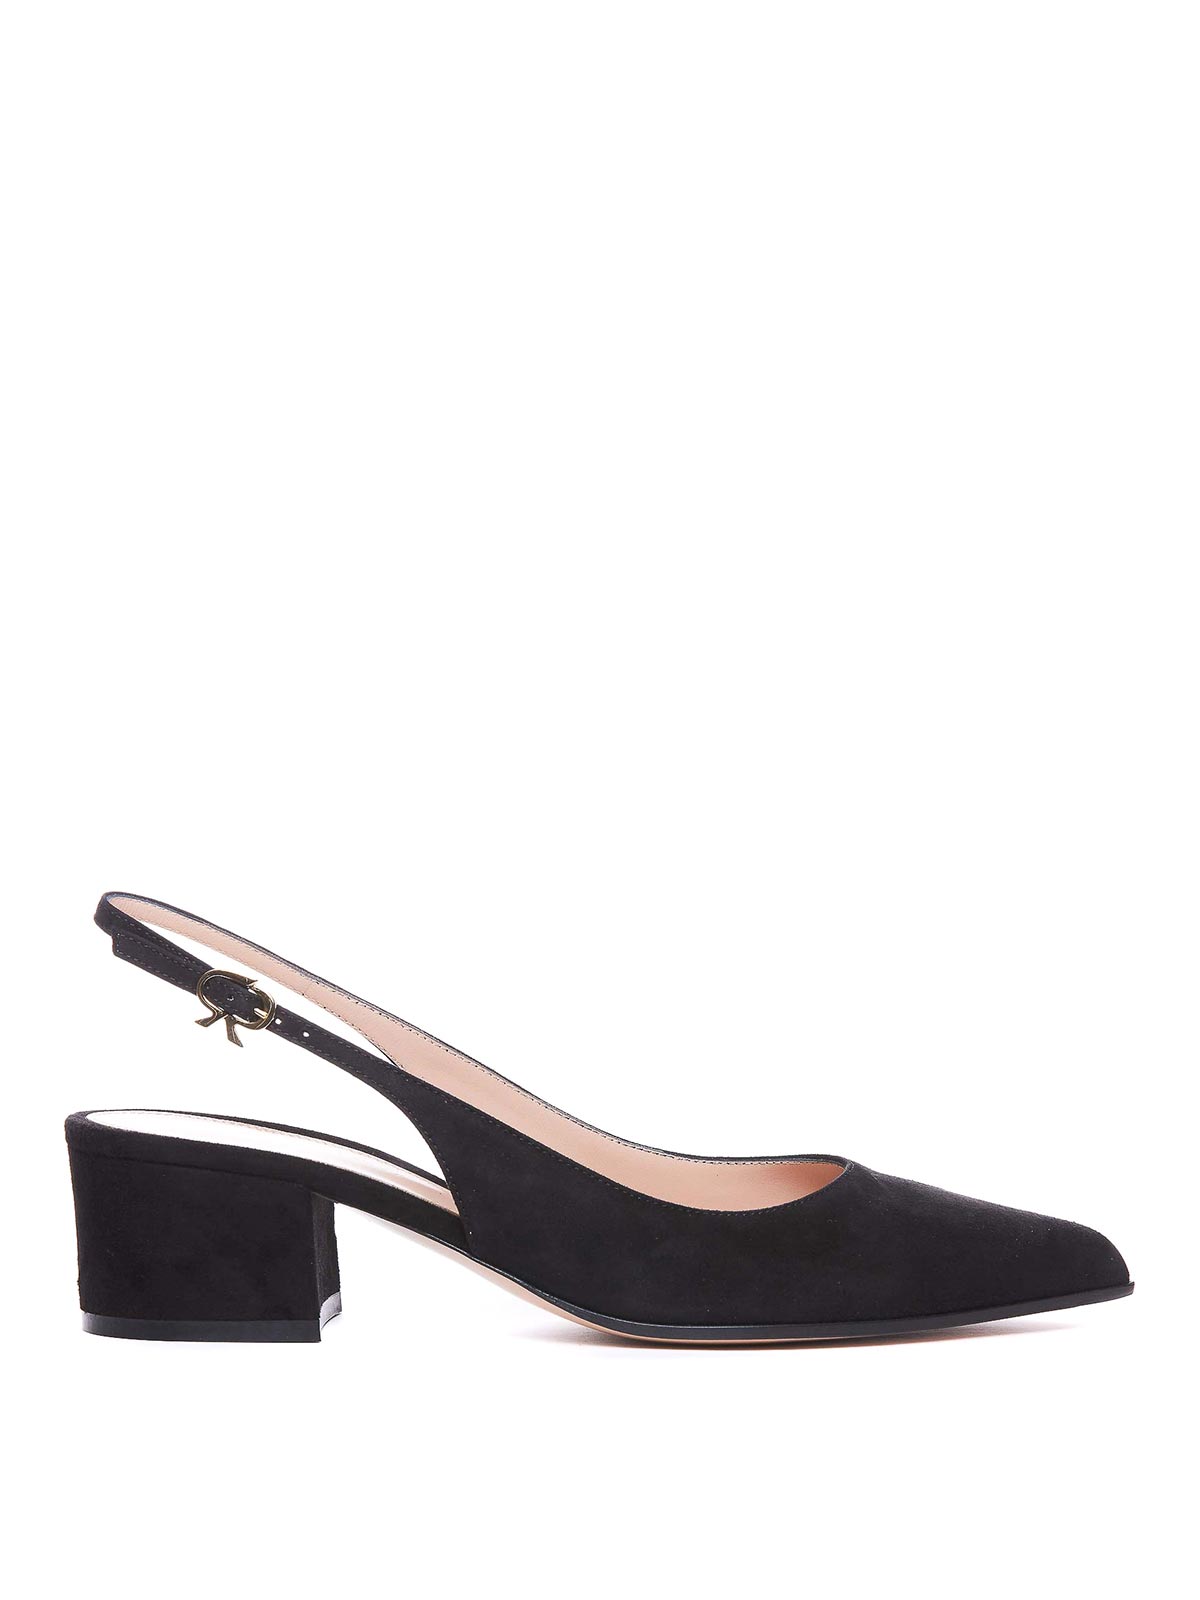 Gianvito Rossi Ribbon 50mm Suede Slingback Pumps In Black